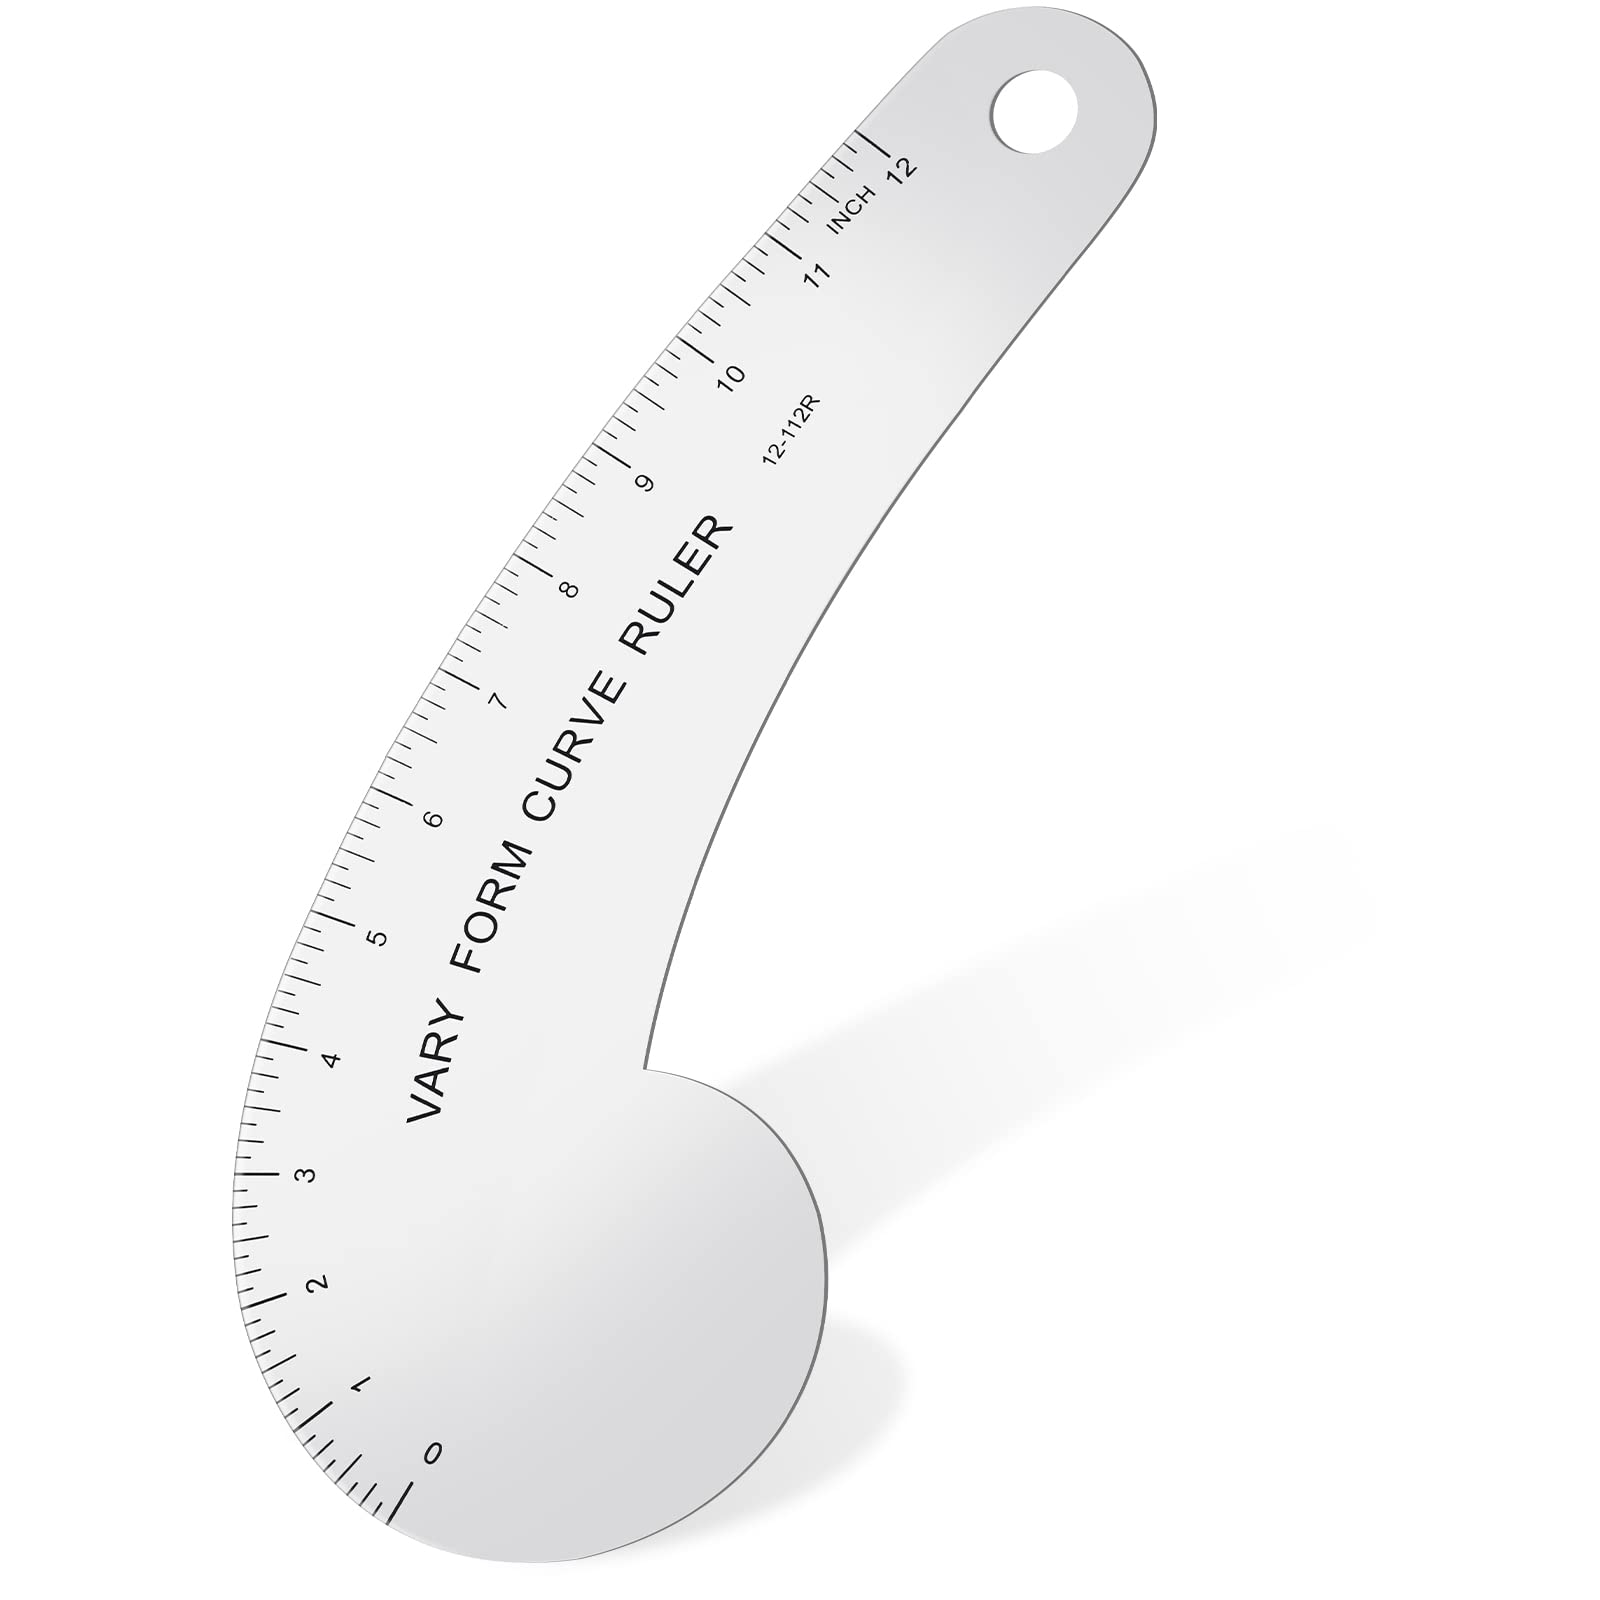 Vary Form Curve Ruler 12'' Solid Aluminum French Curve Hip Curve Ruler for  Measuring Sewing Design Making